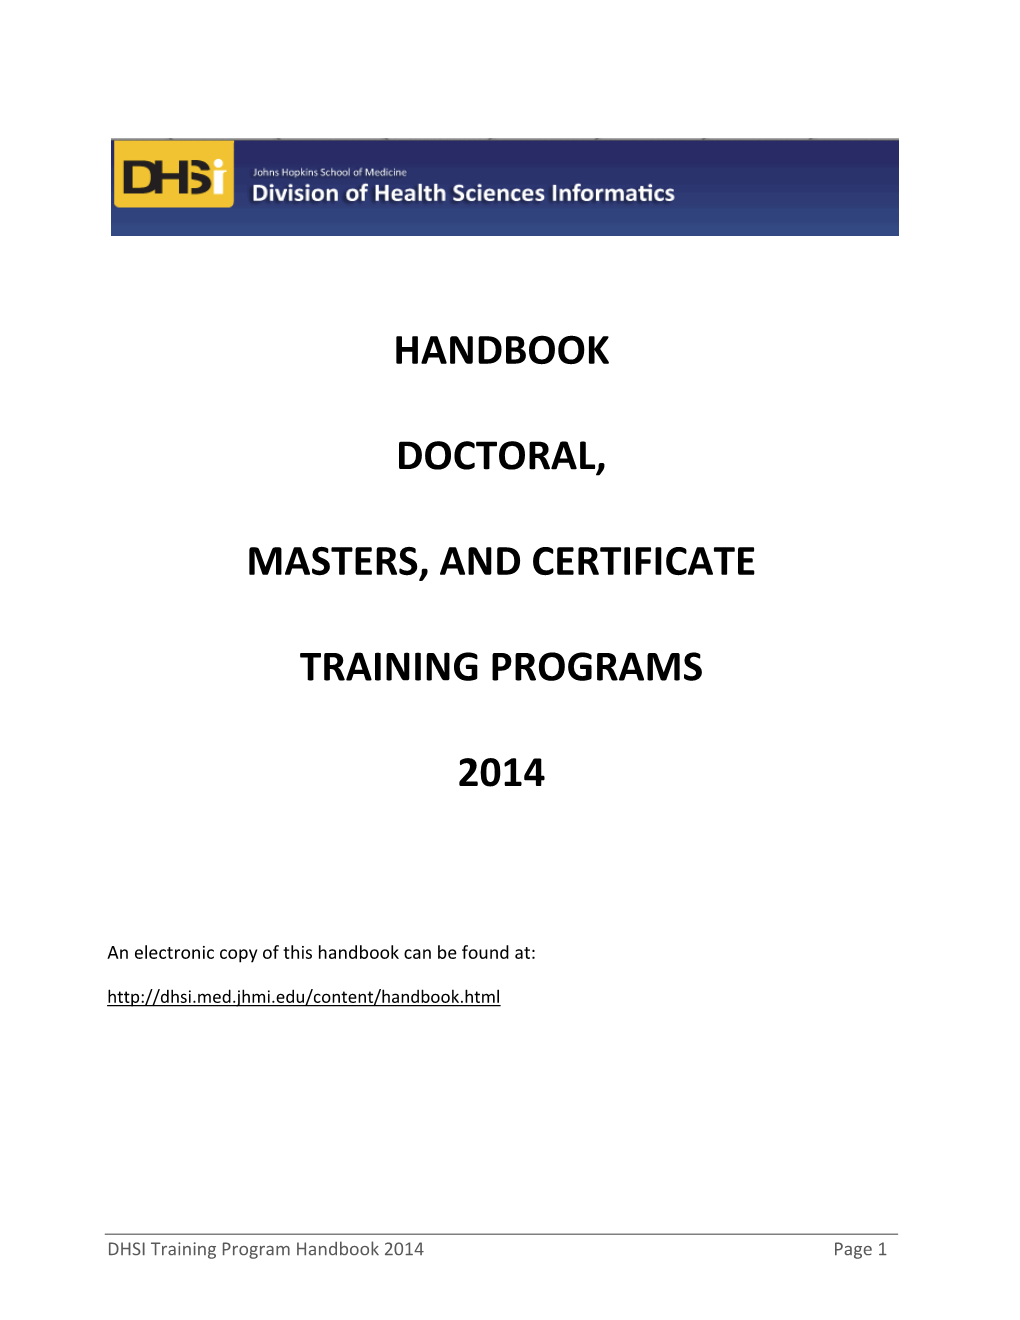 Handbook Doctoral, Masters, and Certificate Training Programs